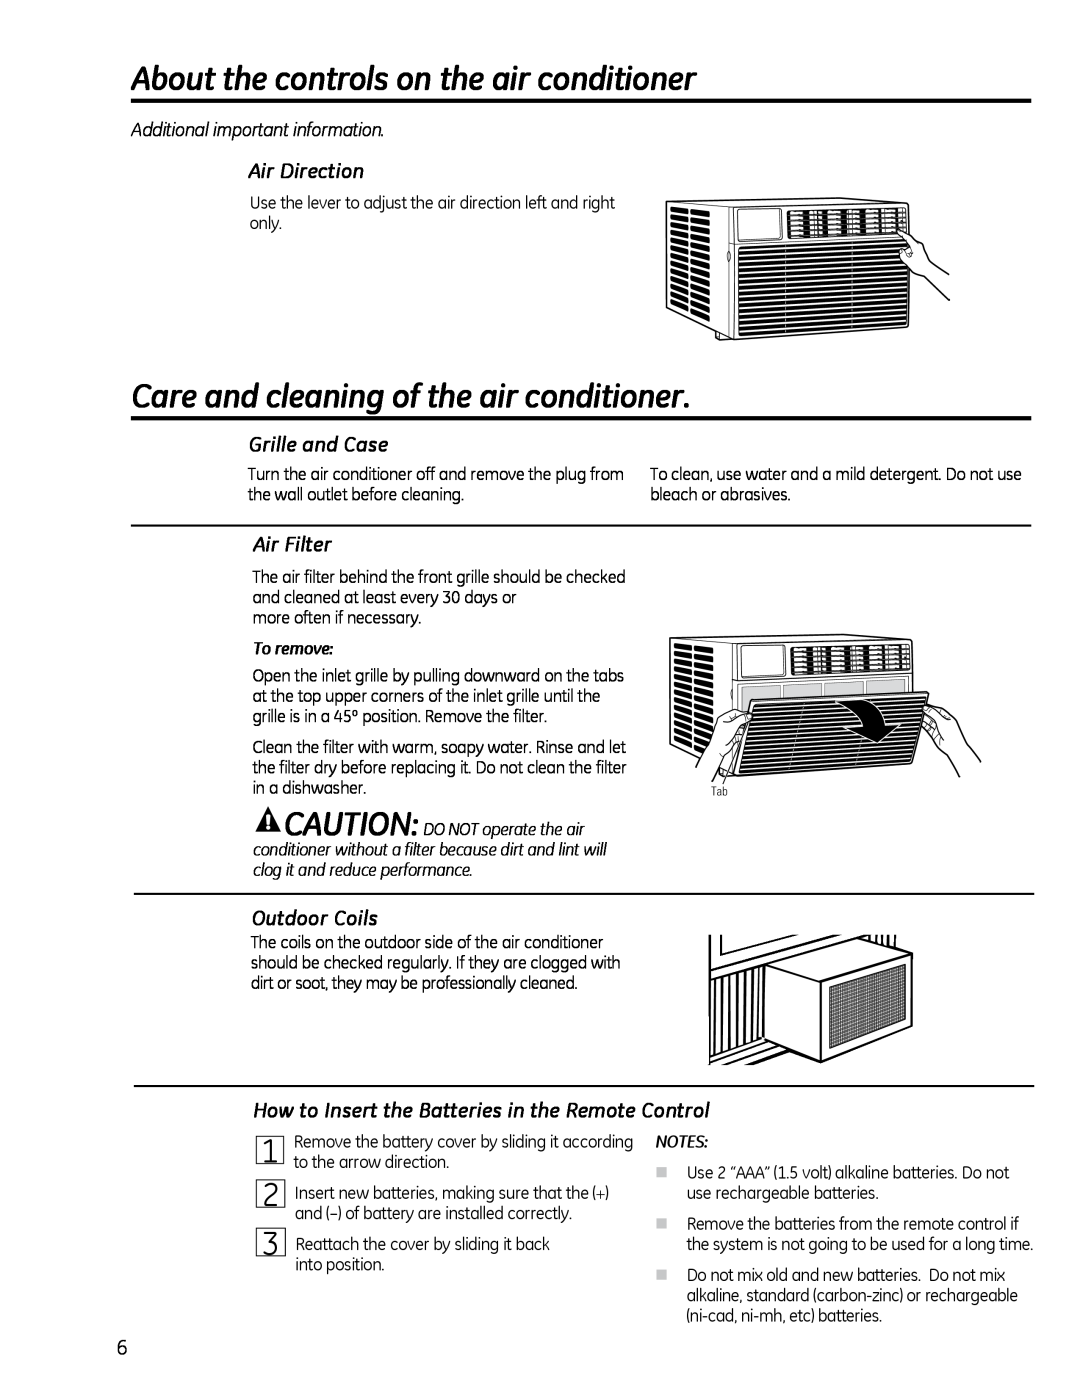 GE AEQ25 Care and cleaning of the air conditioner, Air Direction, Grille and Case, Air Filter, Outdoor Coils, To remove 